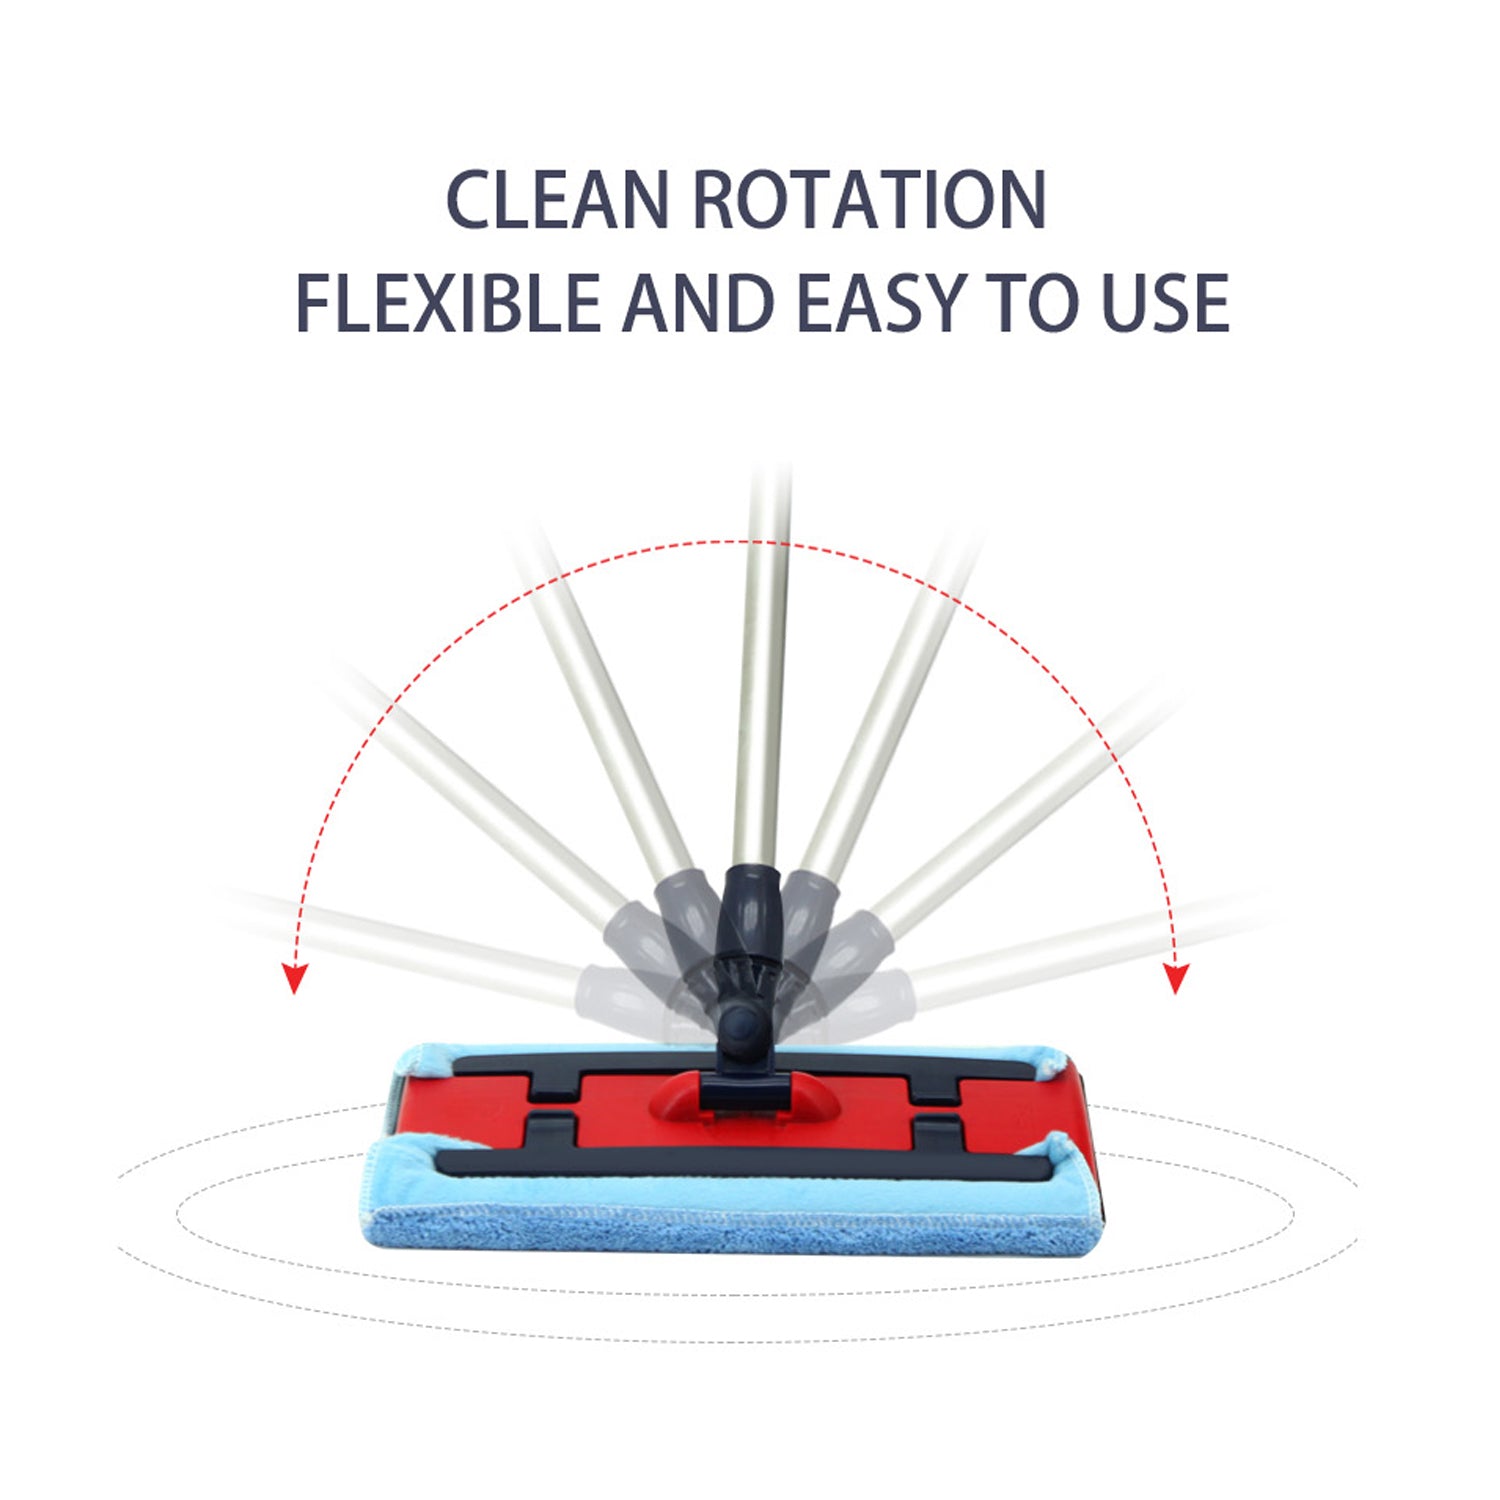 7879 Mop for Floor Cleaning, Microfiber Mop, Flat Mop, Rotating Mop for Floor Cleaning